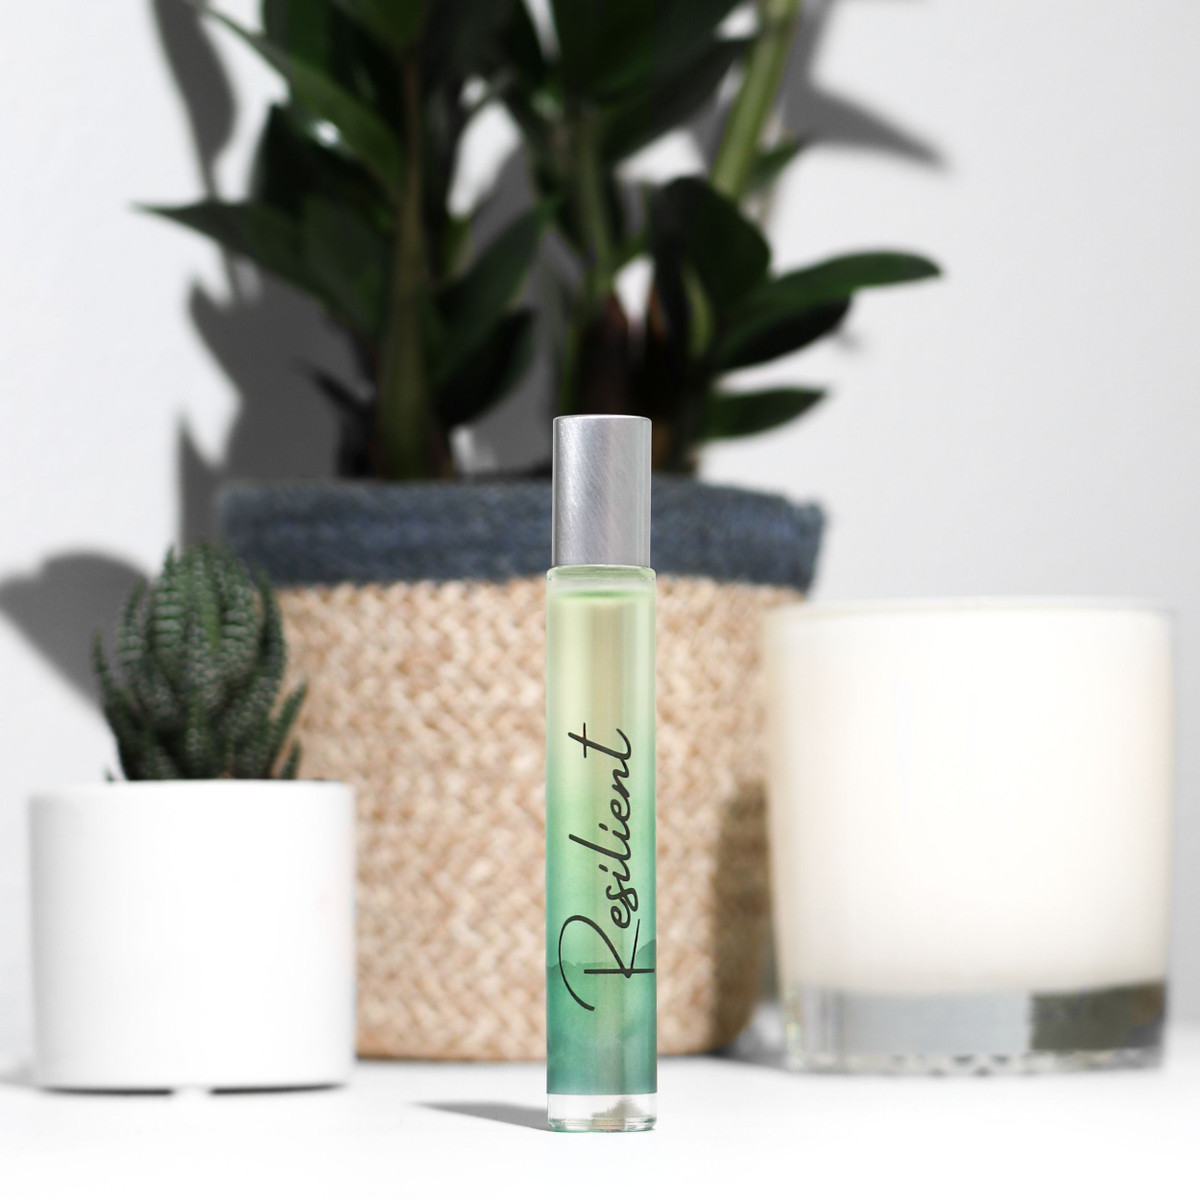 Resilient Rollerball Perfume